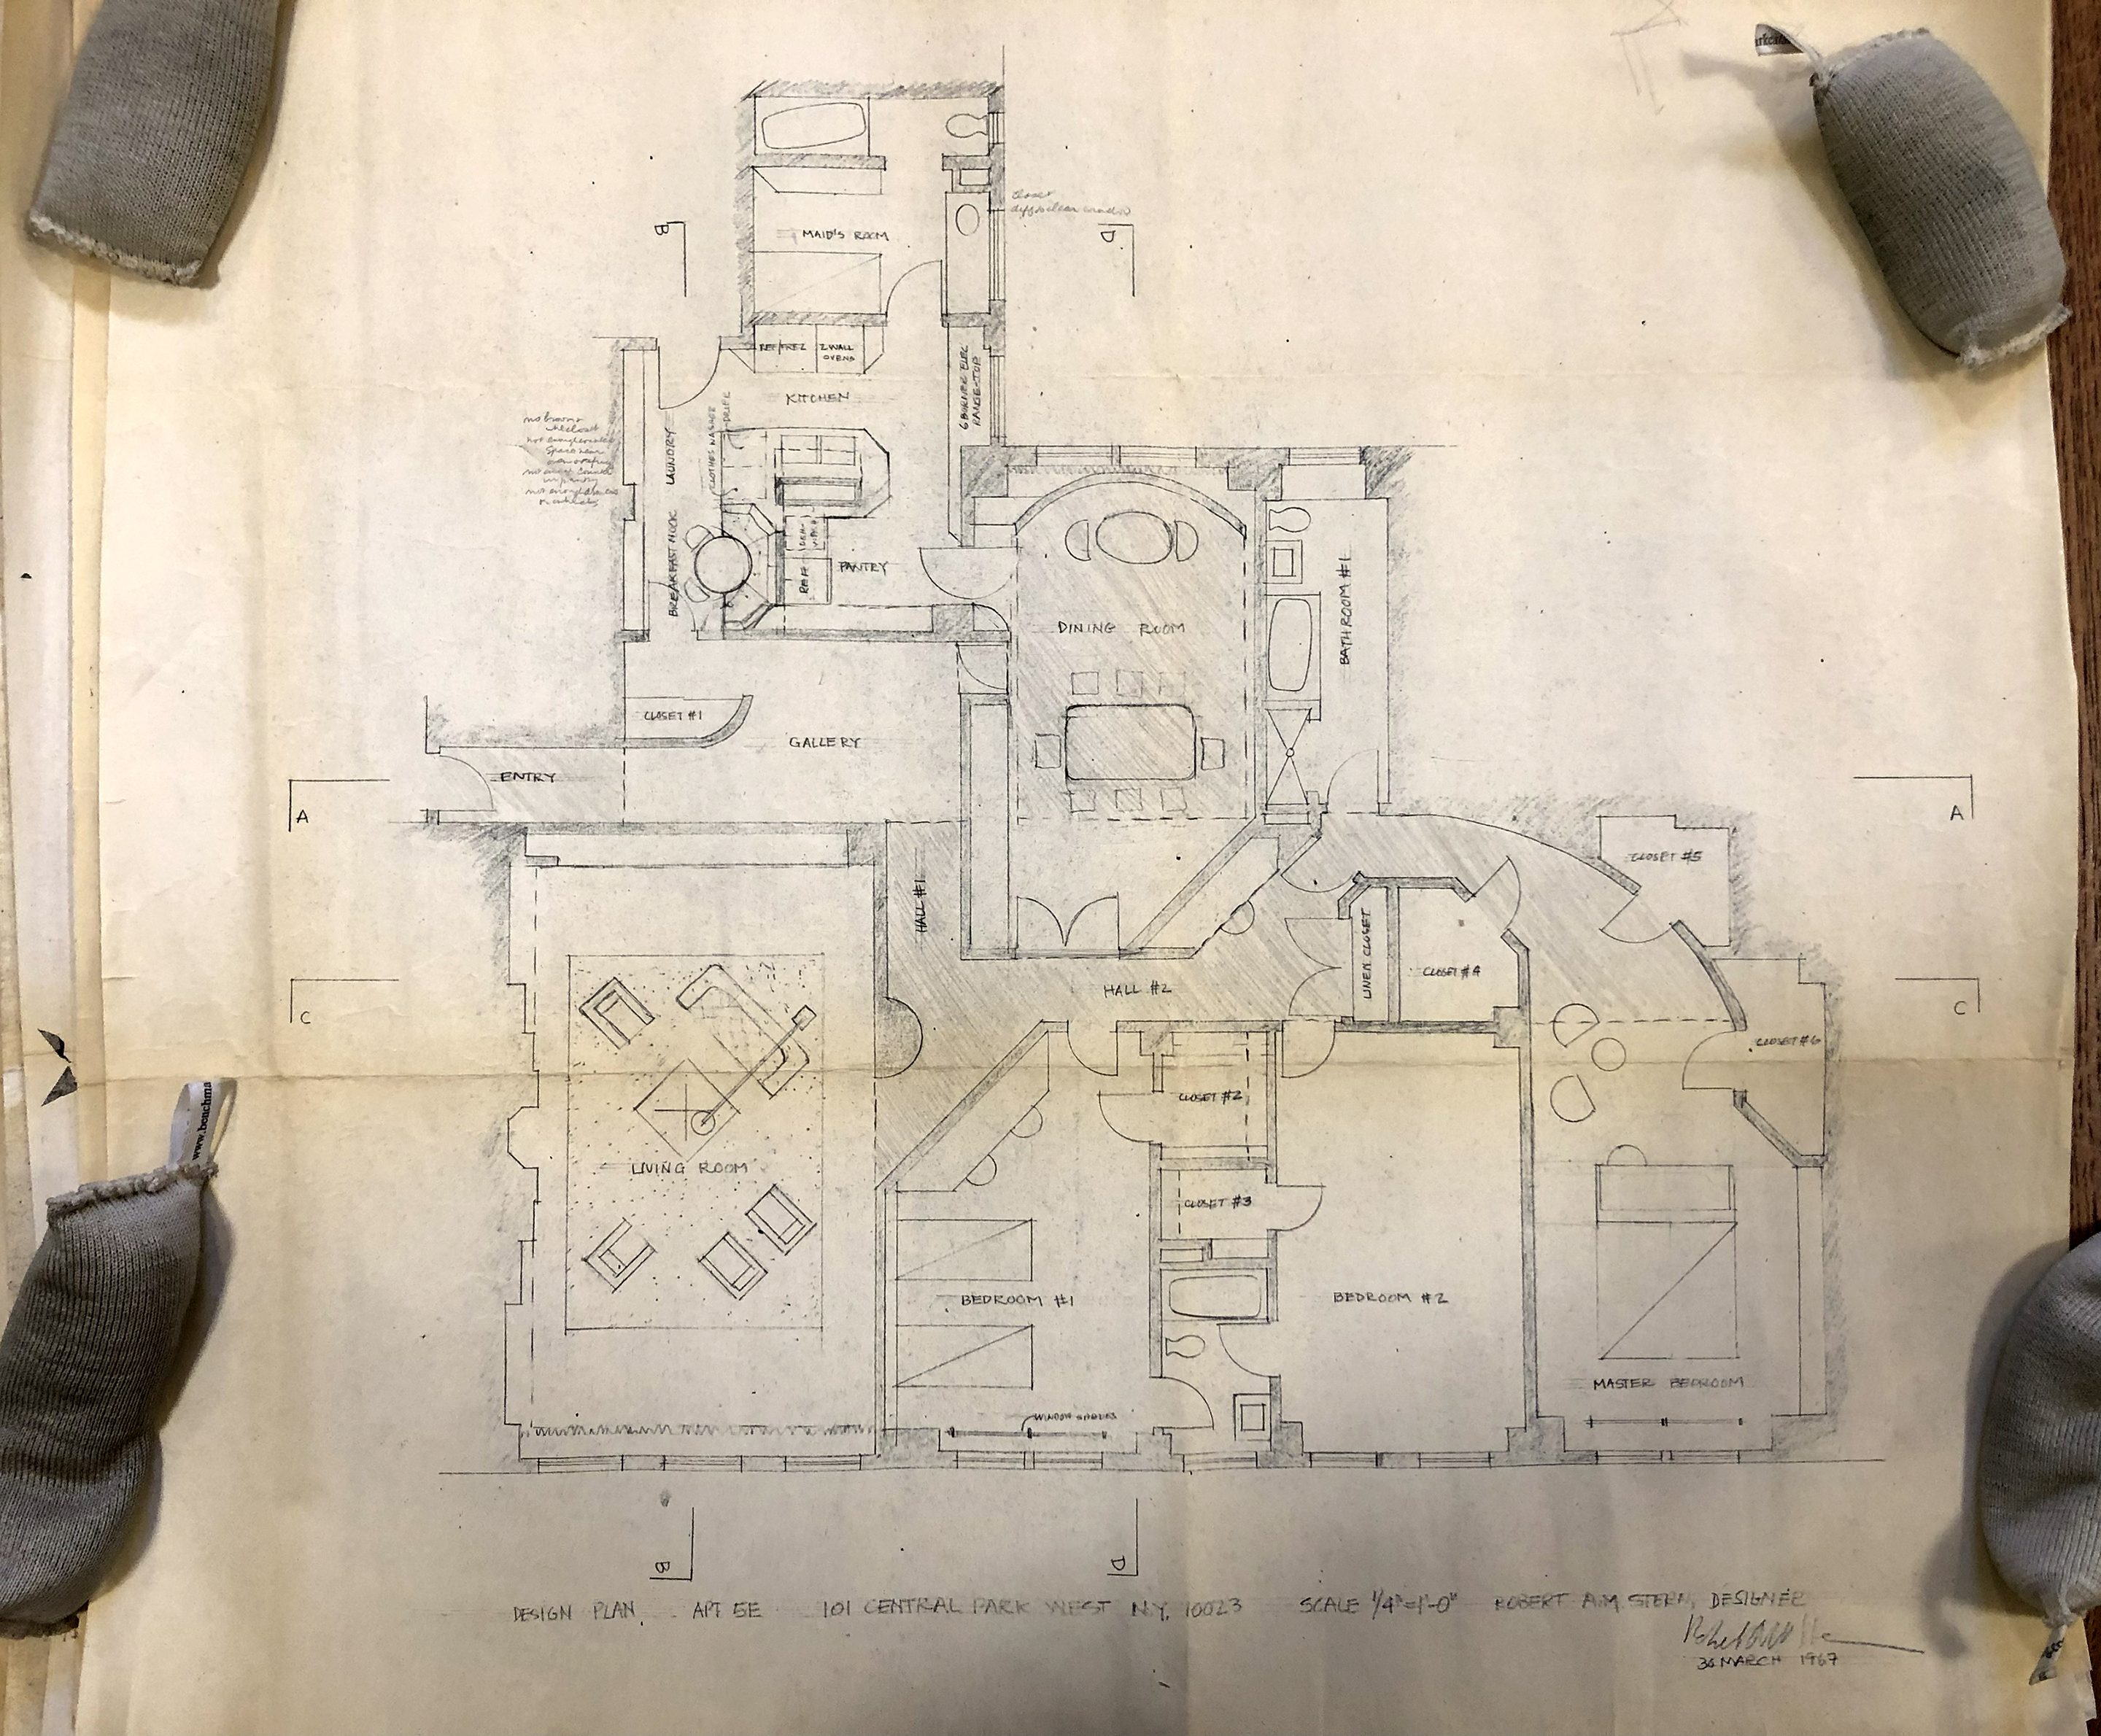 <p><span><span><span><span><span>The Robert A. M. Stern Architects Records collection at Yale University Library Manuscripts &amp; Archives includes documents and drawings. Pictured is a plan of the Stern Apartment II.</span></span></span></span></span></p>
